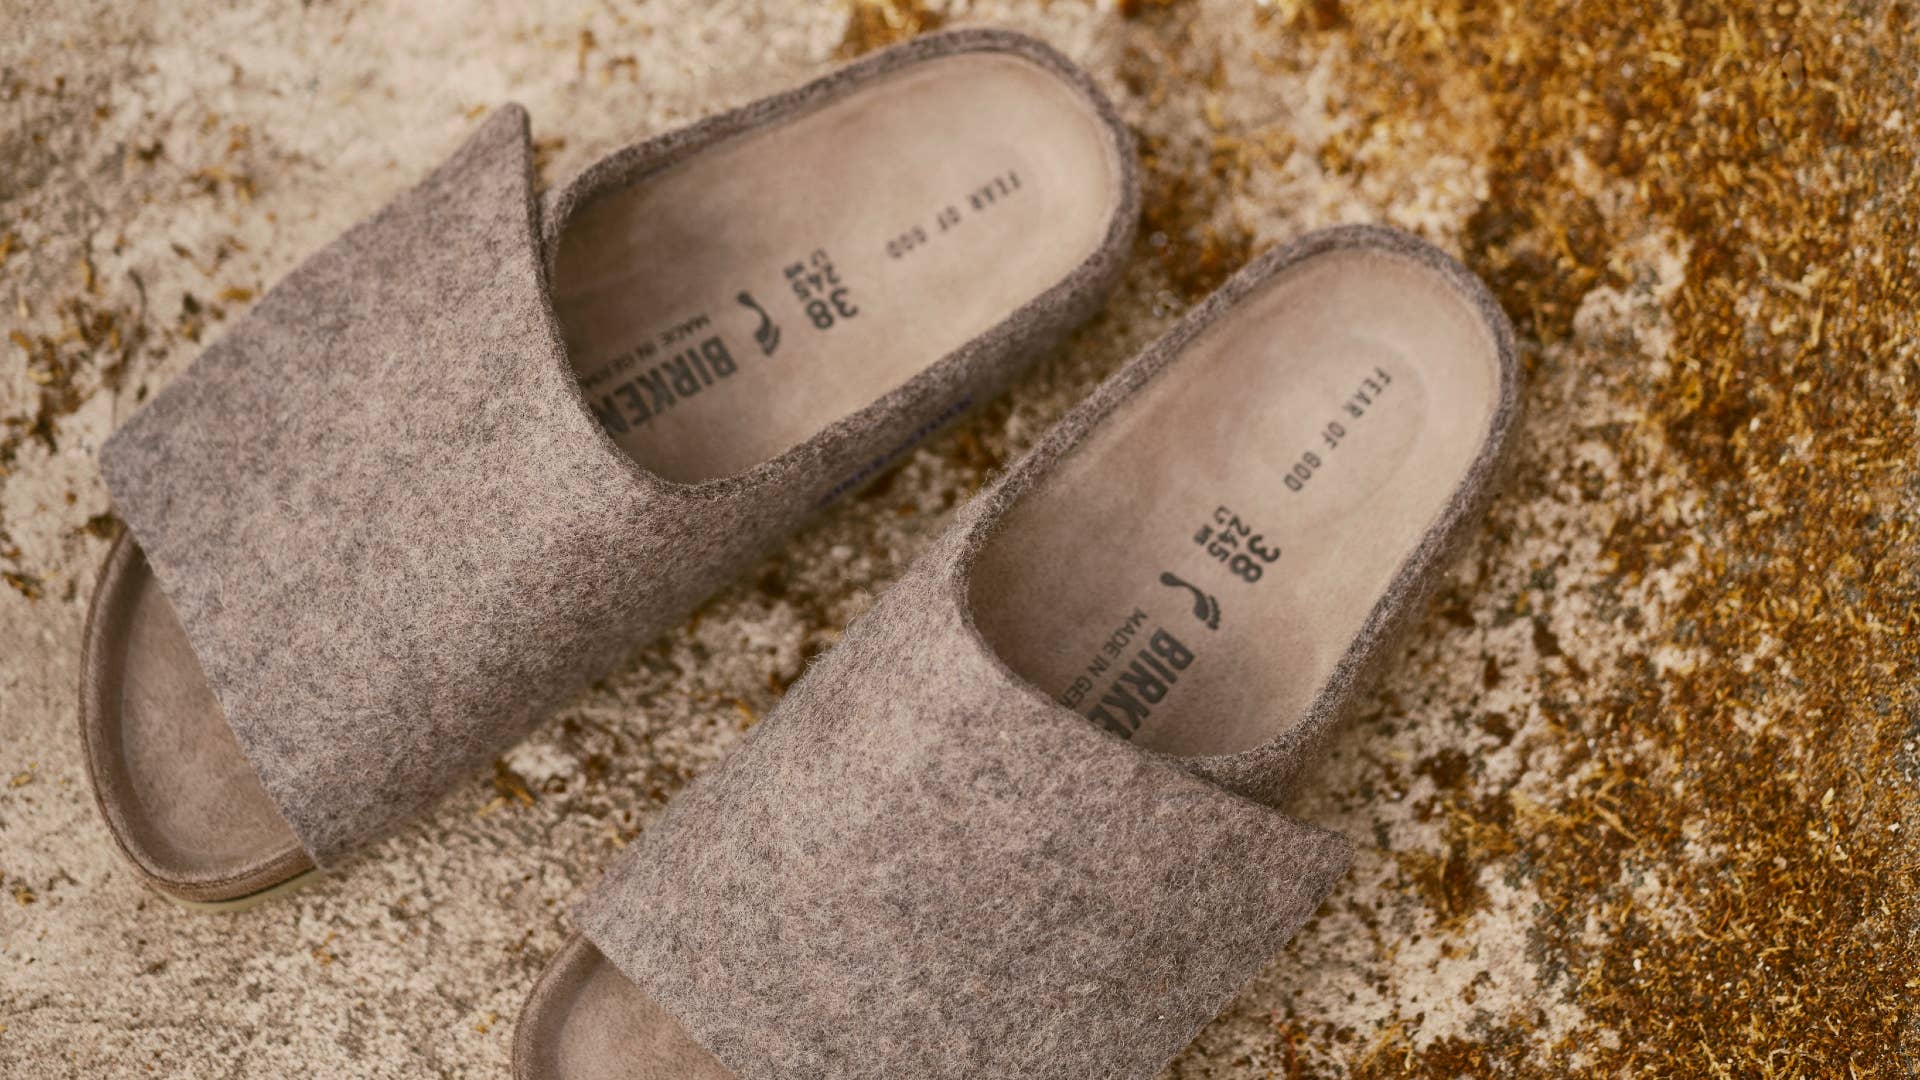 Birkenstock and FoG collab is pictured